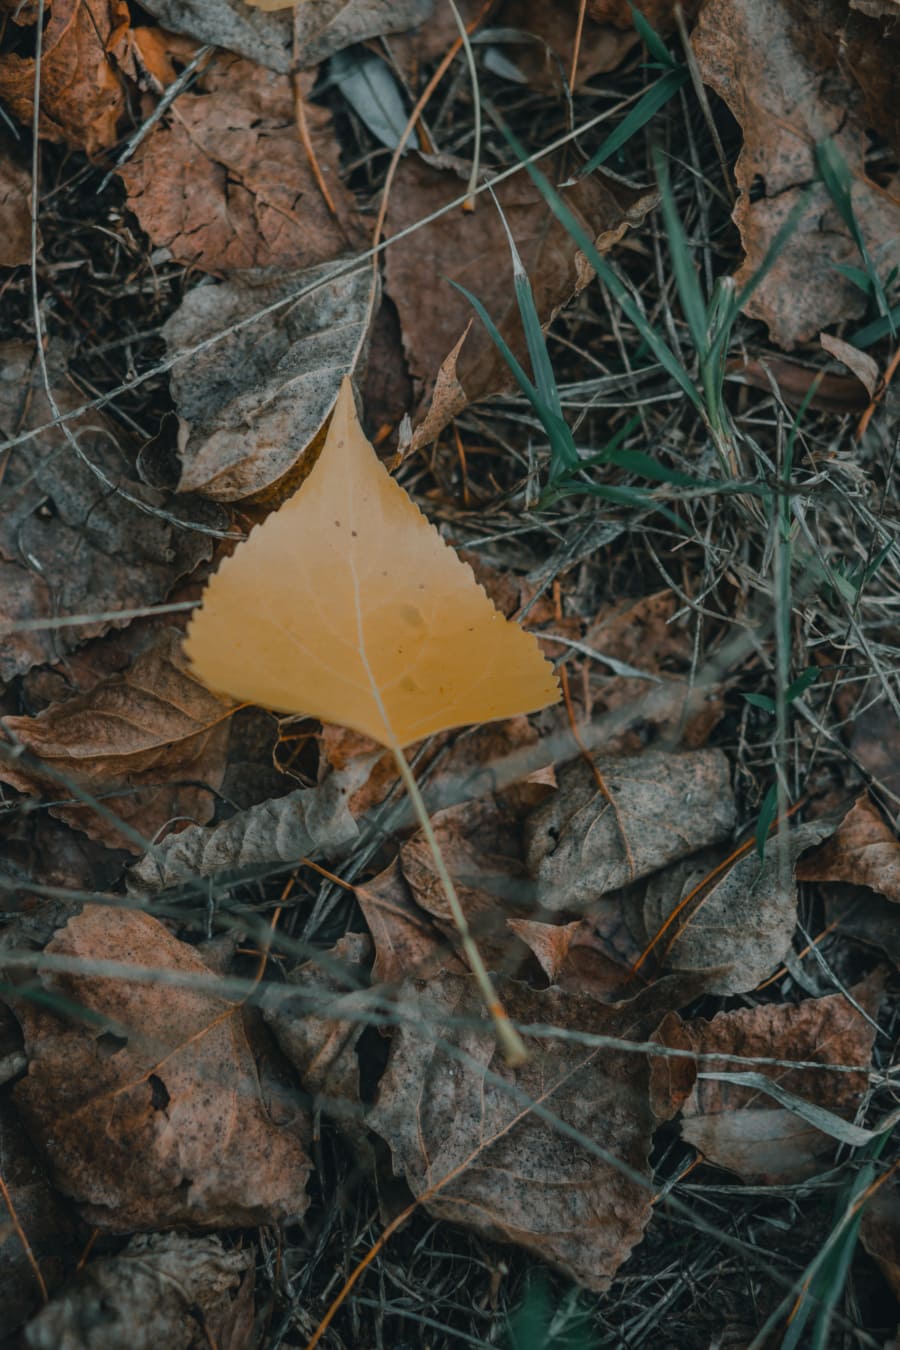 ground, autumn season, dry, yellow leaves, yellowish brown, leaf, nature, outdoors, flora, texture